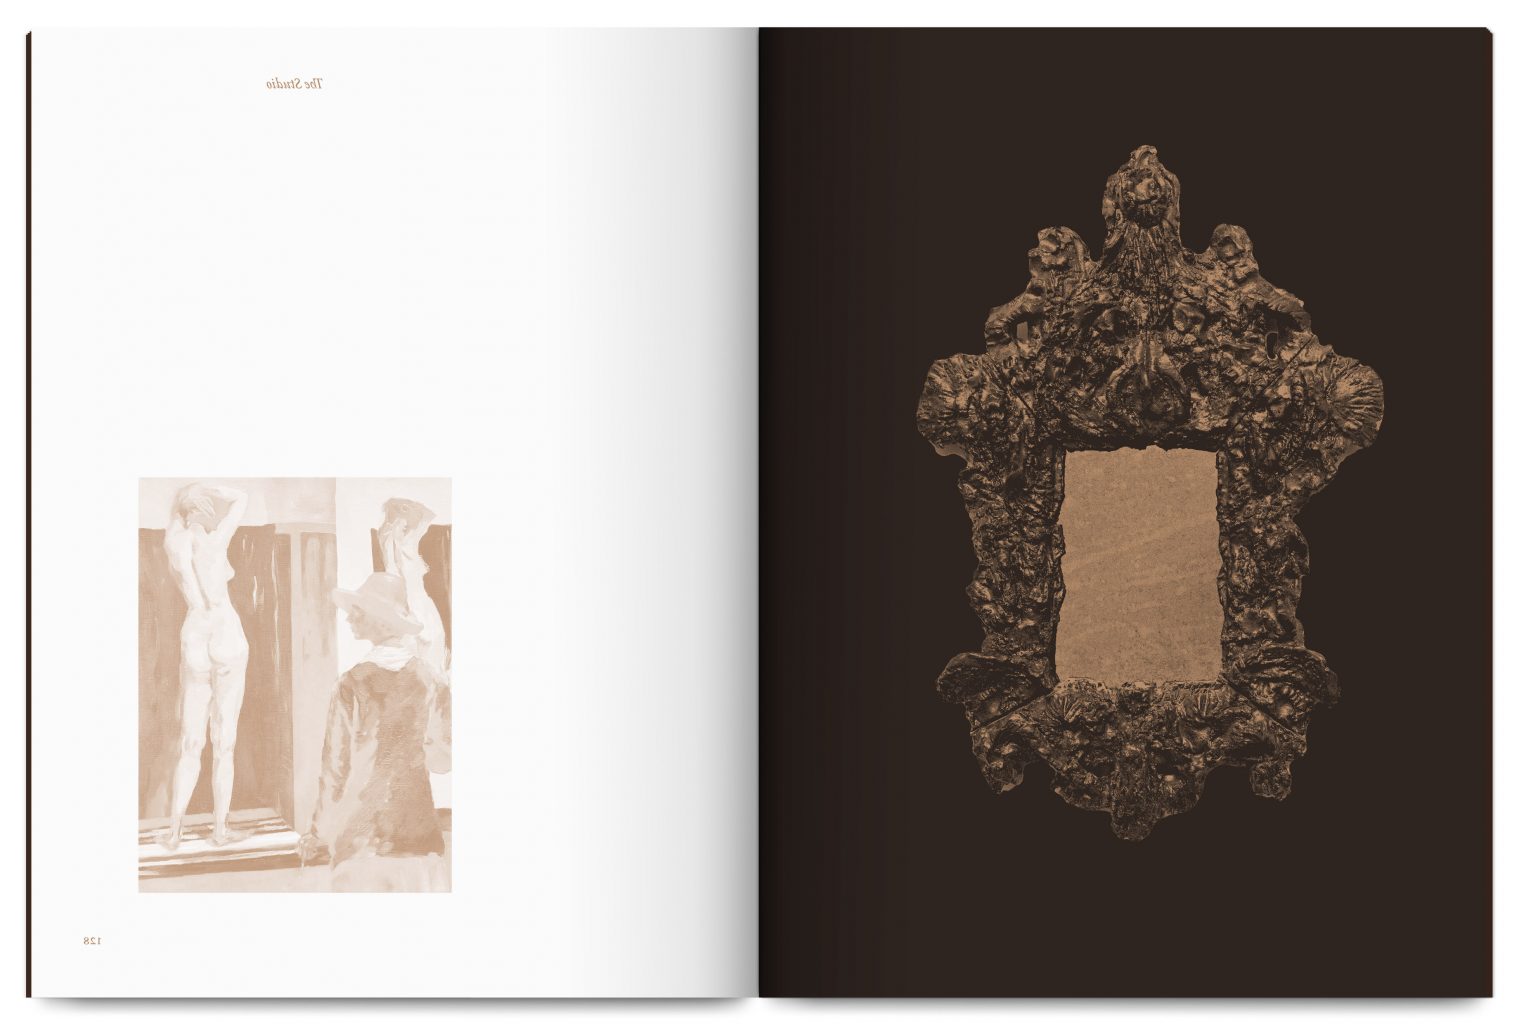 Artist book Her Hauntology – Paulina Olowska, published by Kistefos Museum, designed by In the shade of a tree studio.